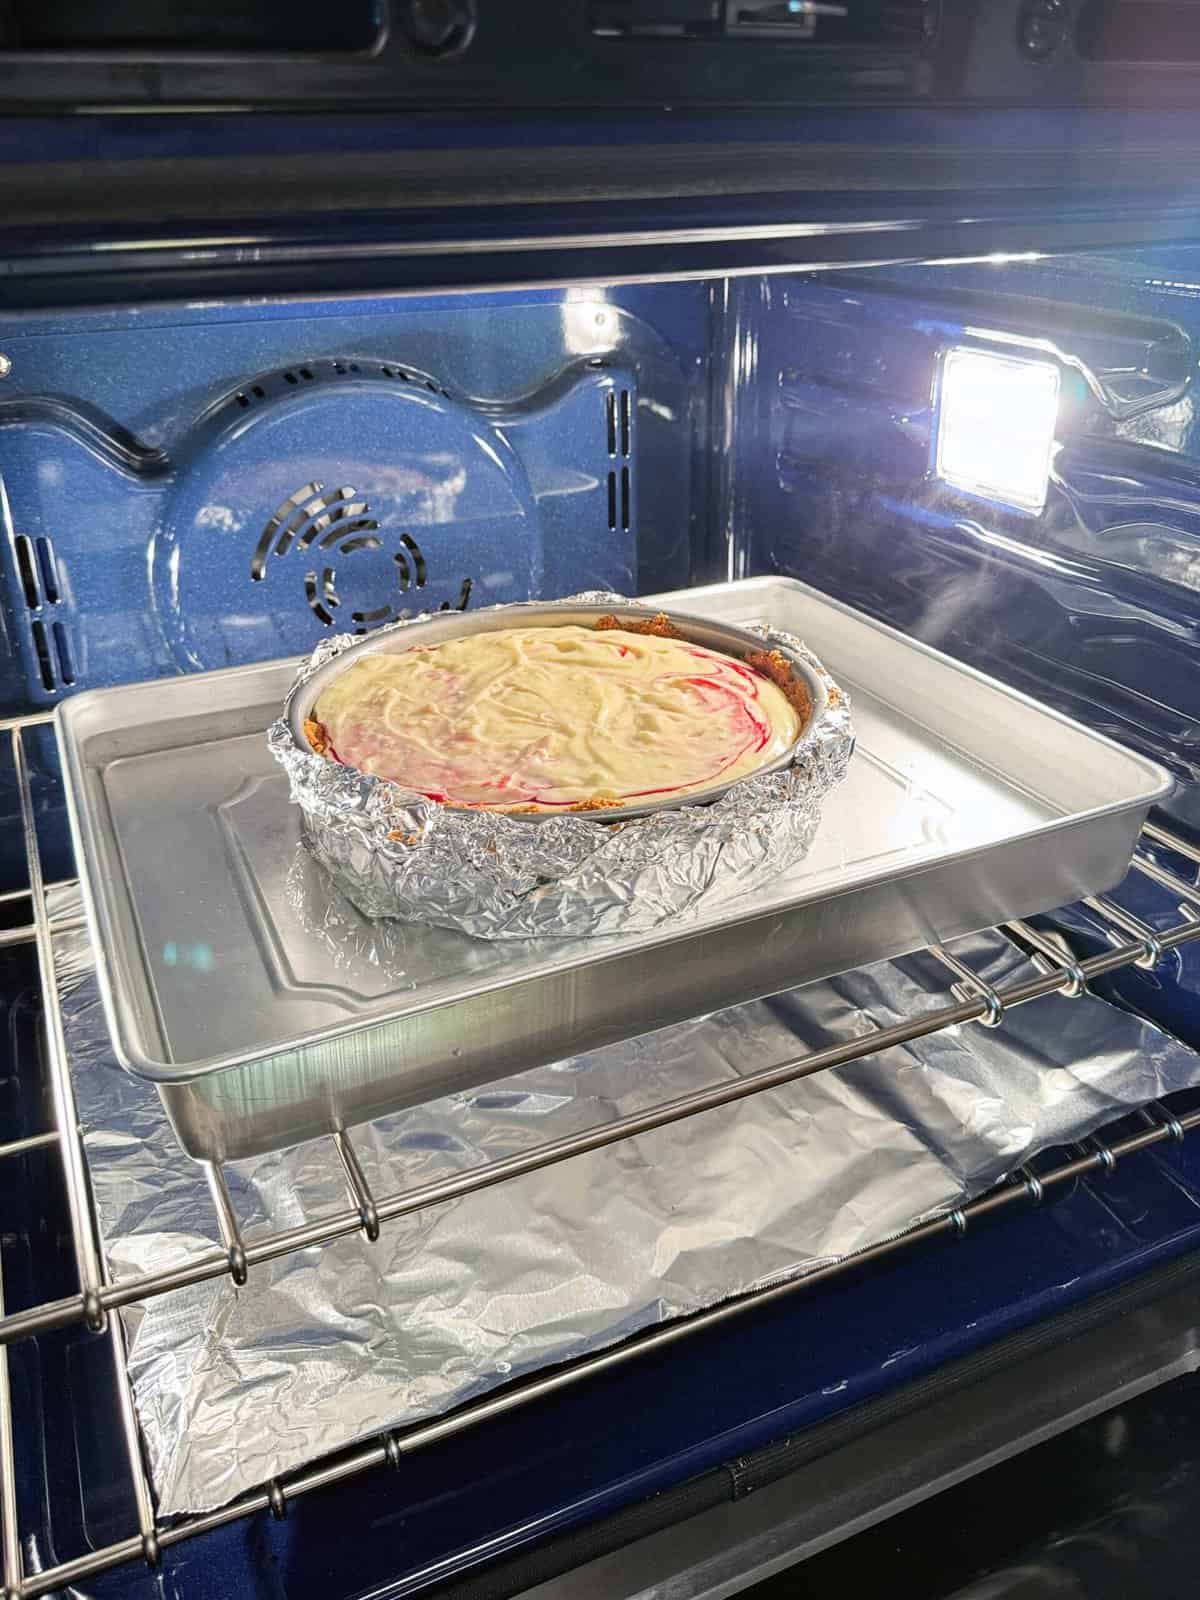 Cheesecake in oven